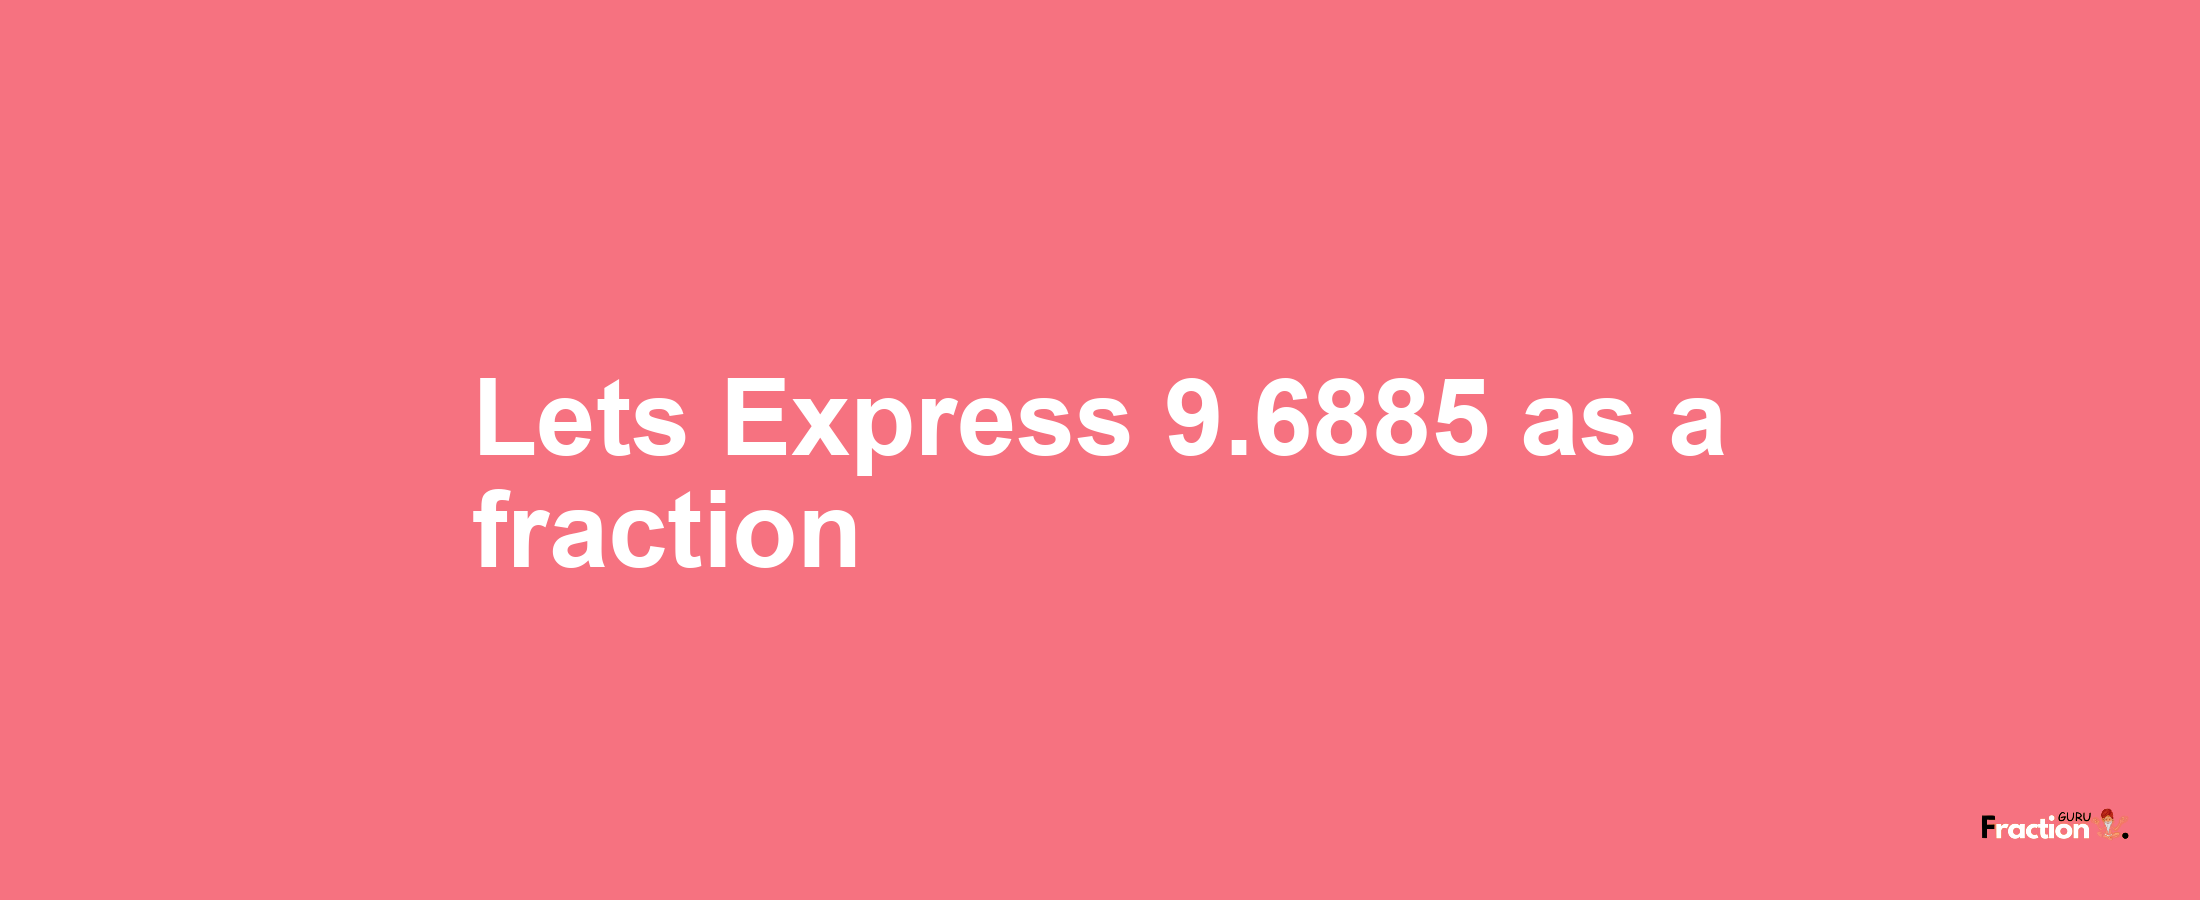 Lets Express 9.6885 as afraction